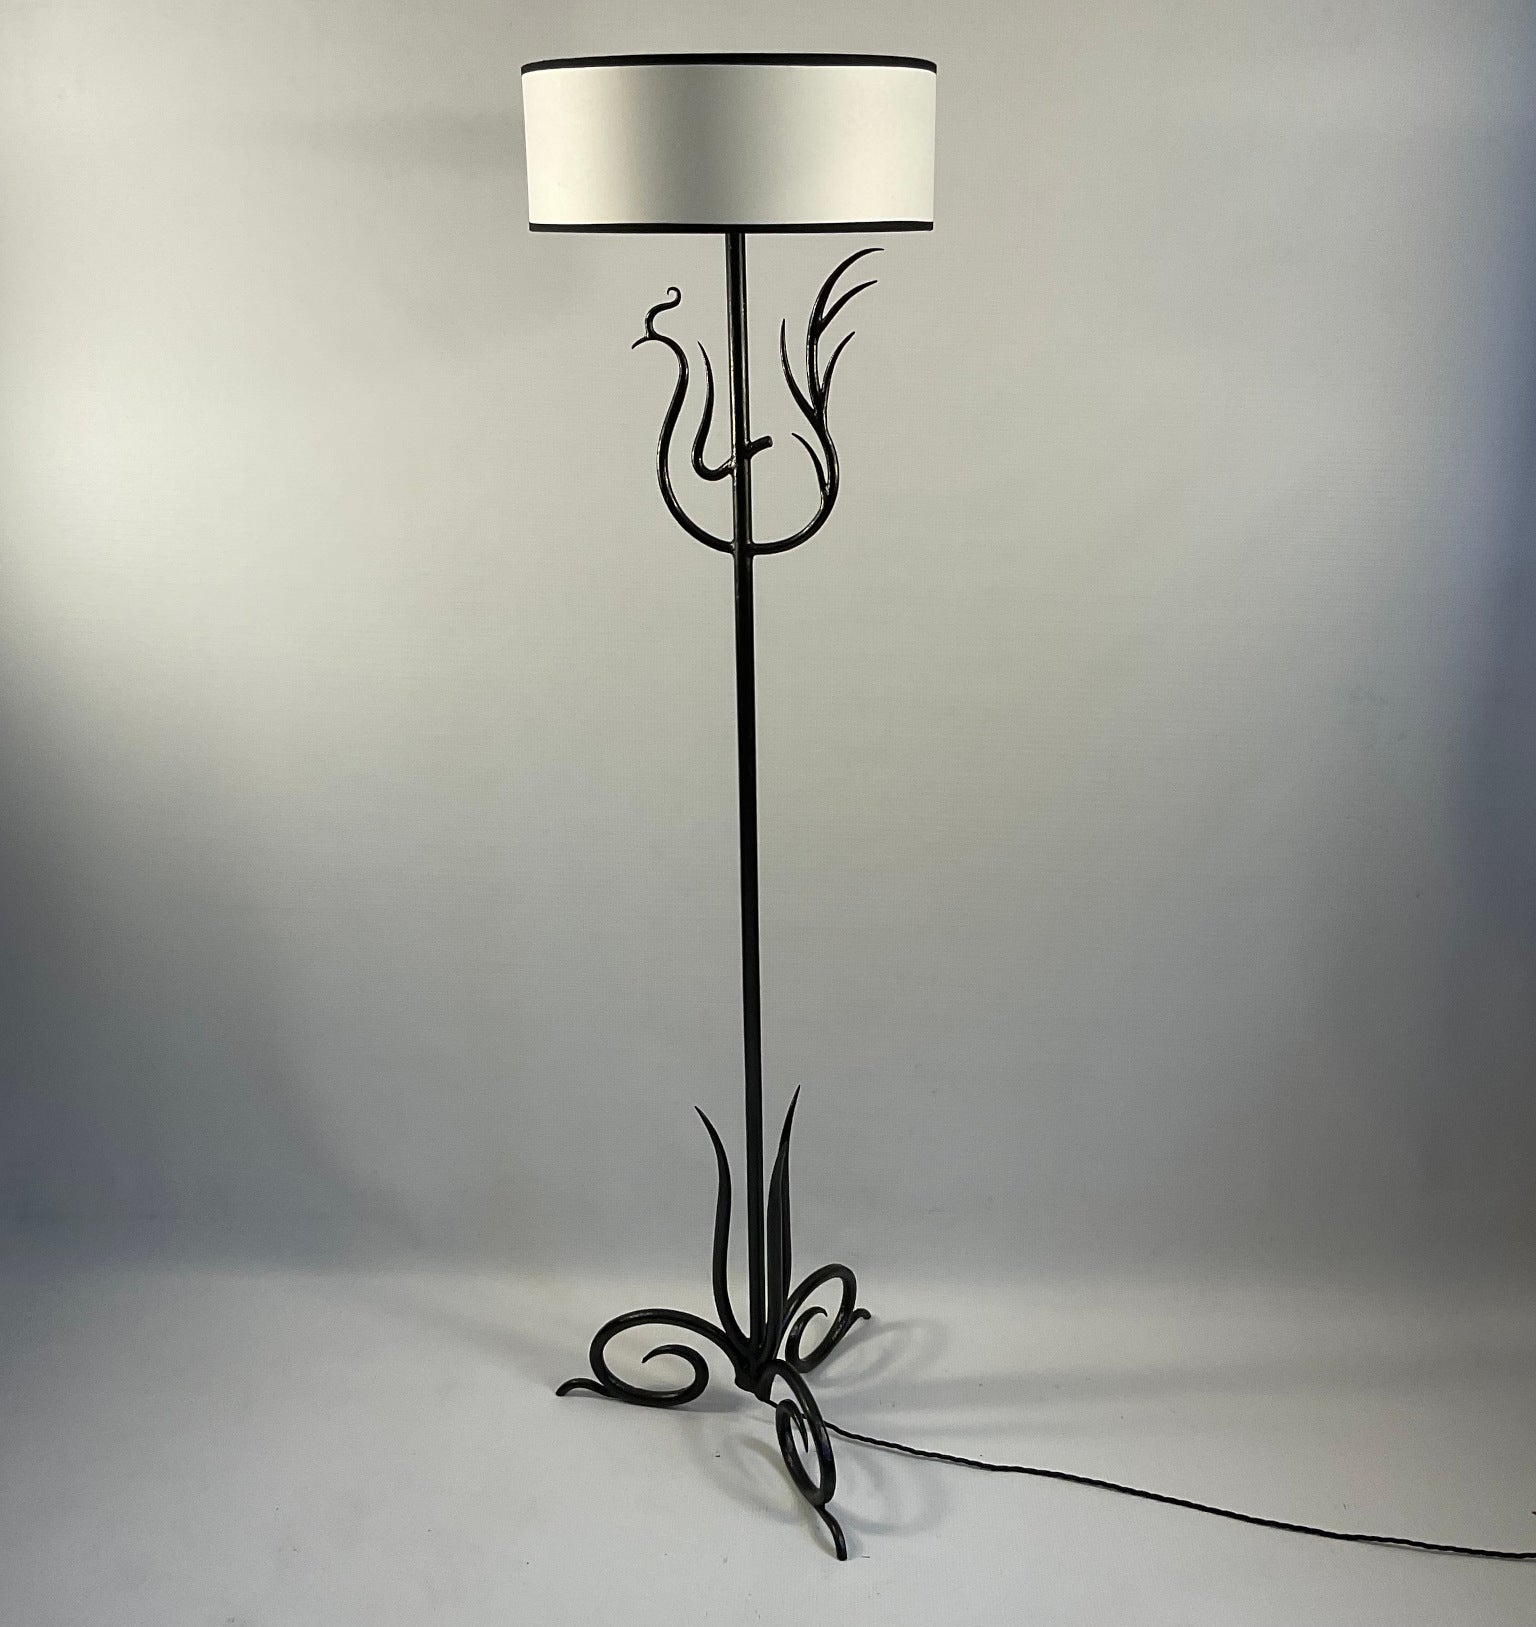 This French wrought iron floor lamp from the 1940s could be an interpretation of the mythical creature 